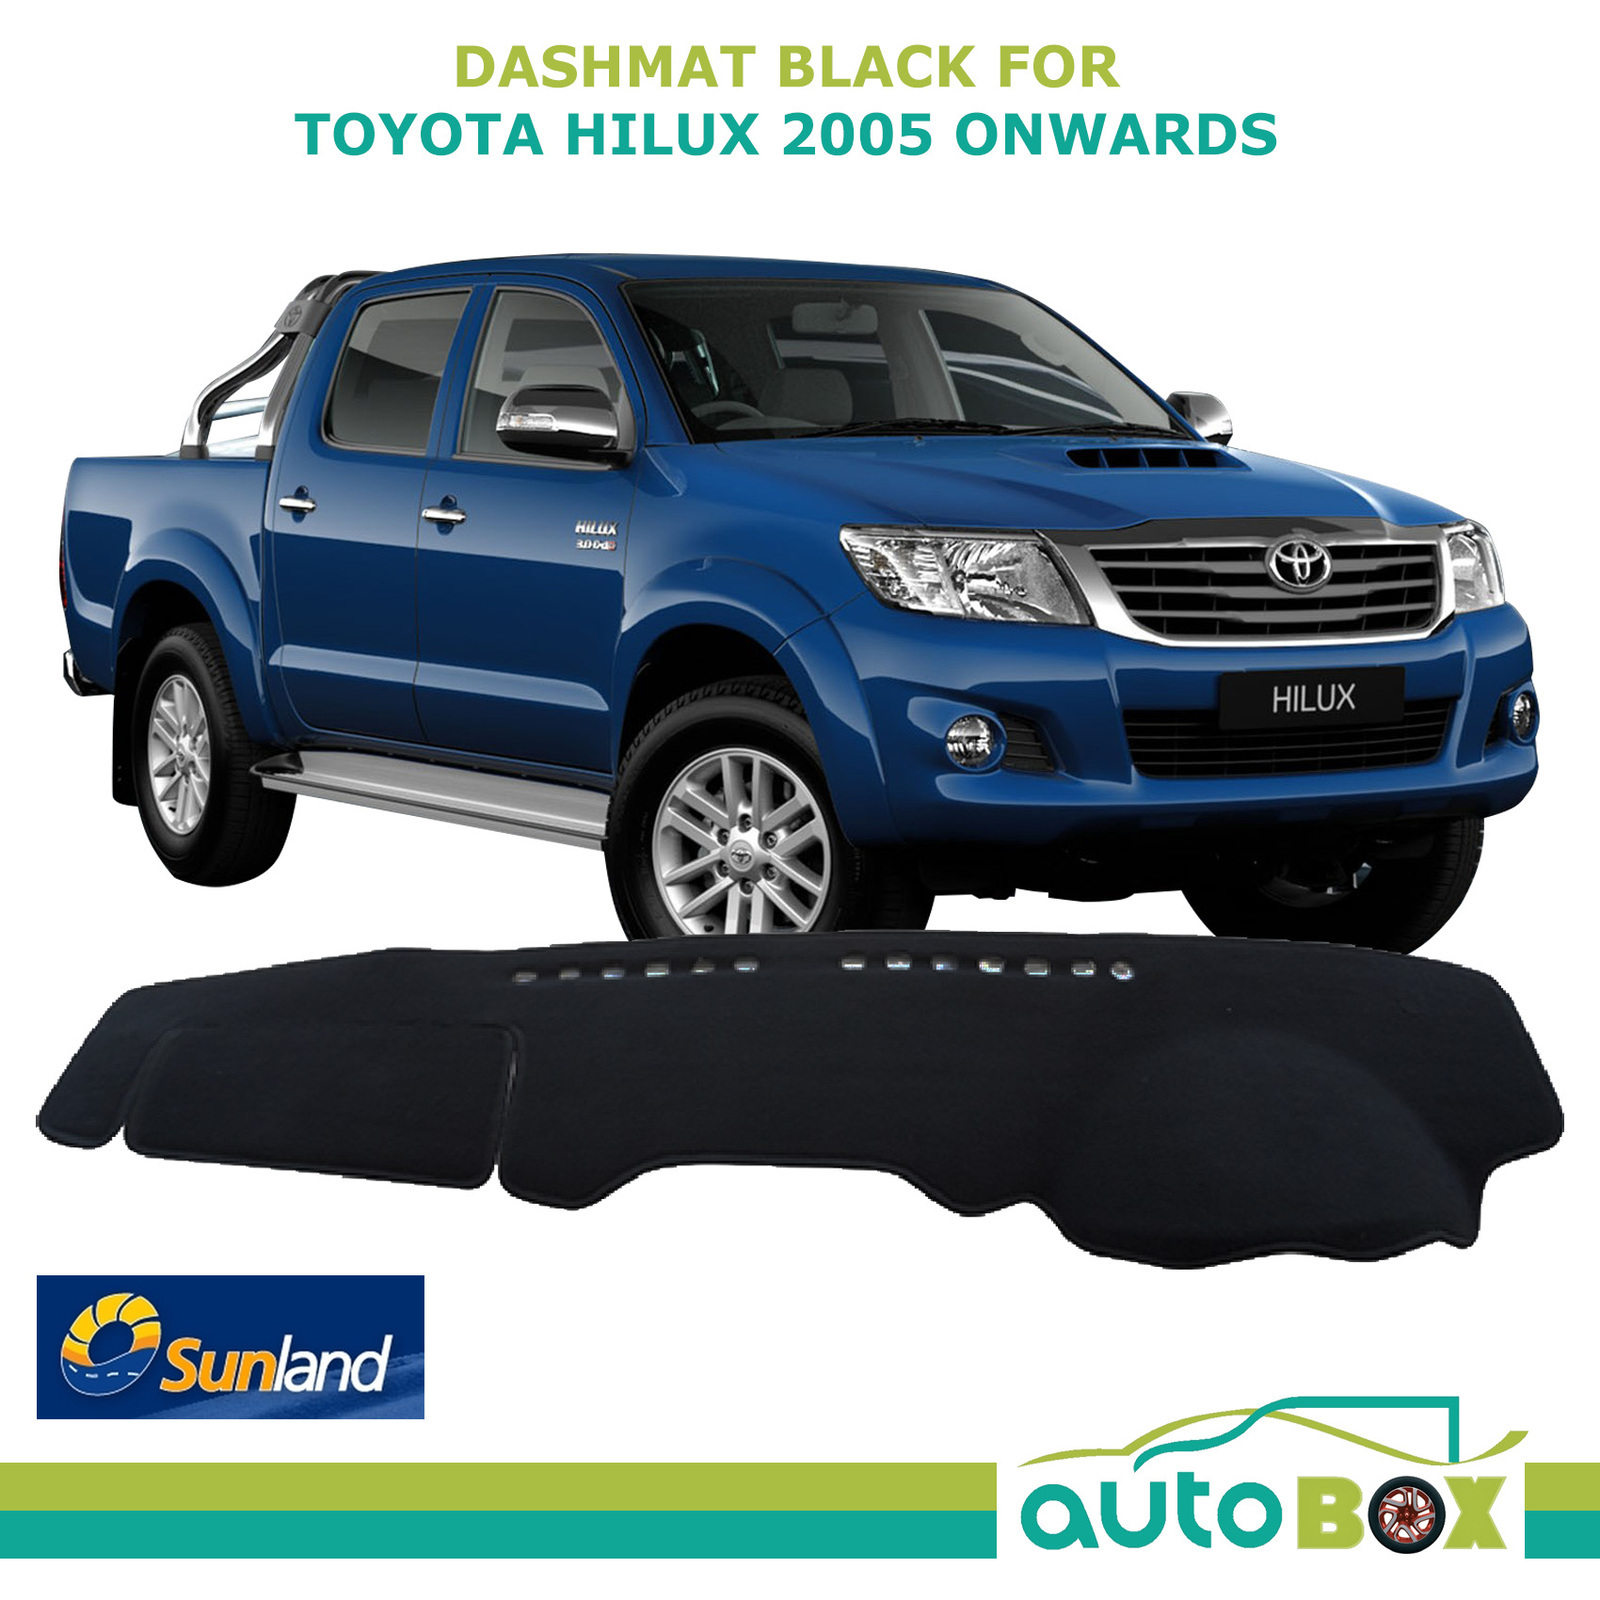 Sunland DashMat Dash Cover Black fits Toyota Hilux March 05 to Aug 15 All  Models